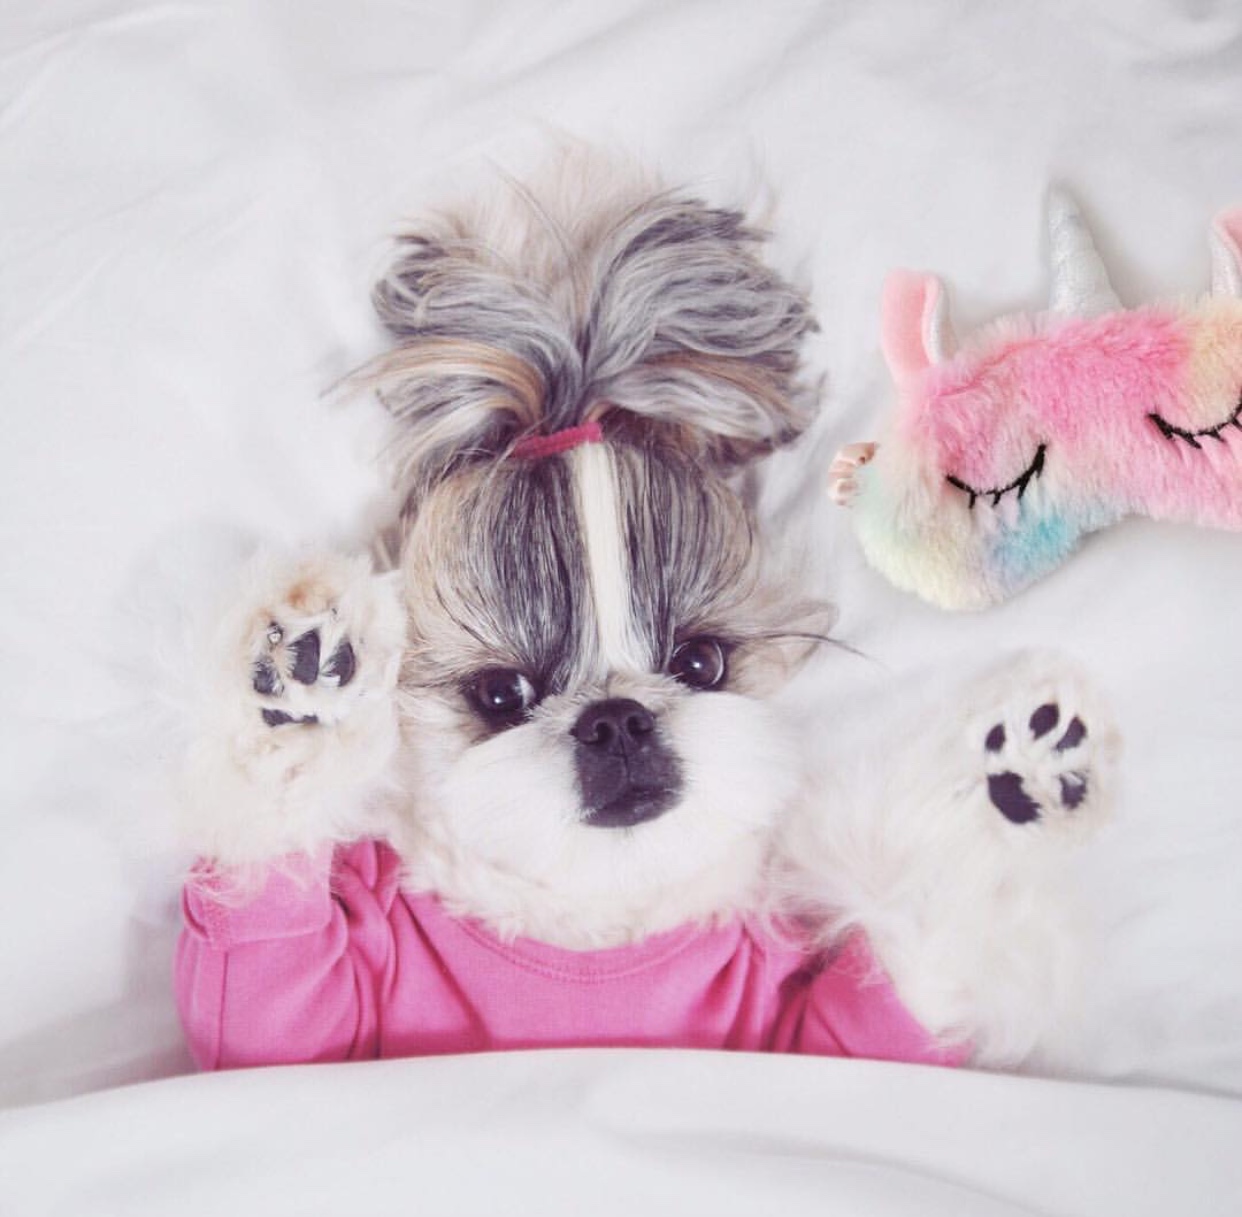 A Shih Tzu wearing a pink hair tie and pink sweater while snuggled in bed with her unicorn eye mask